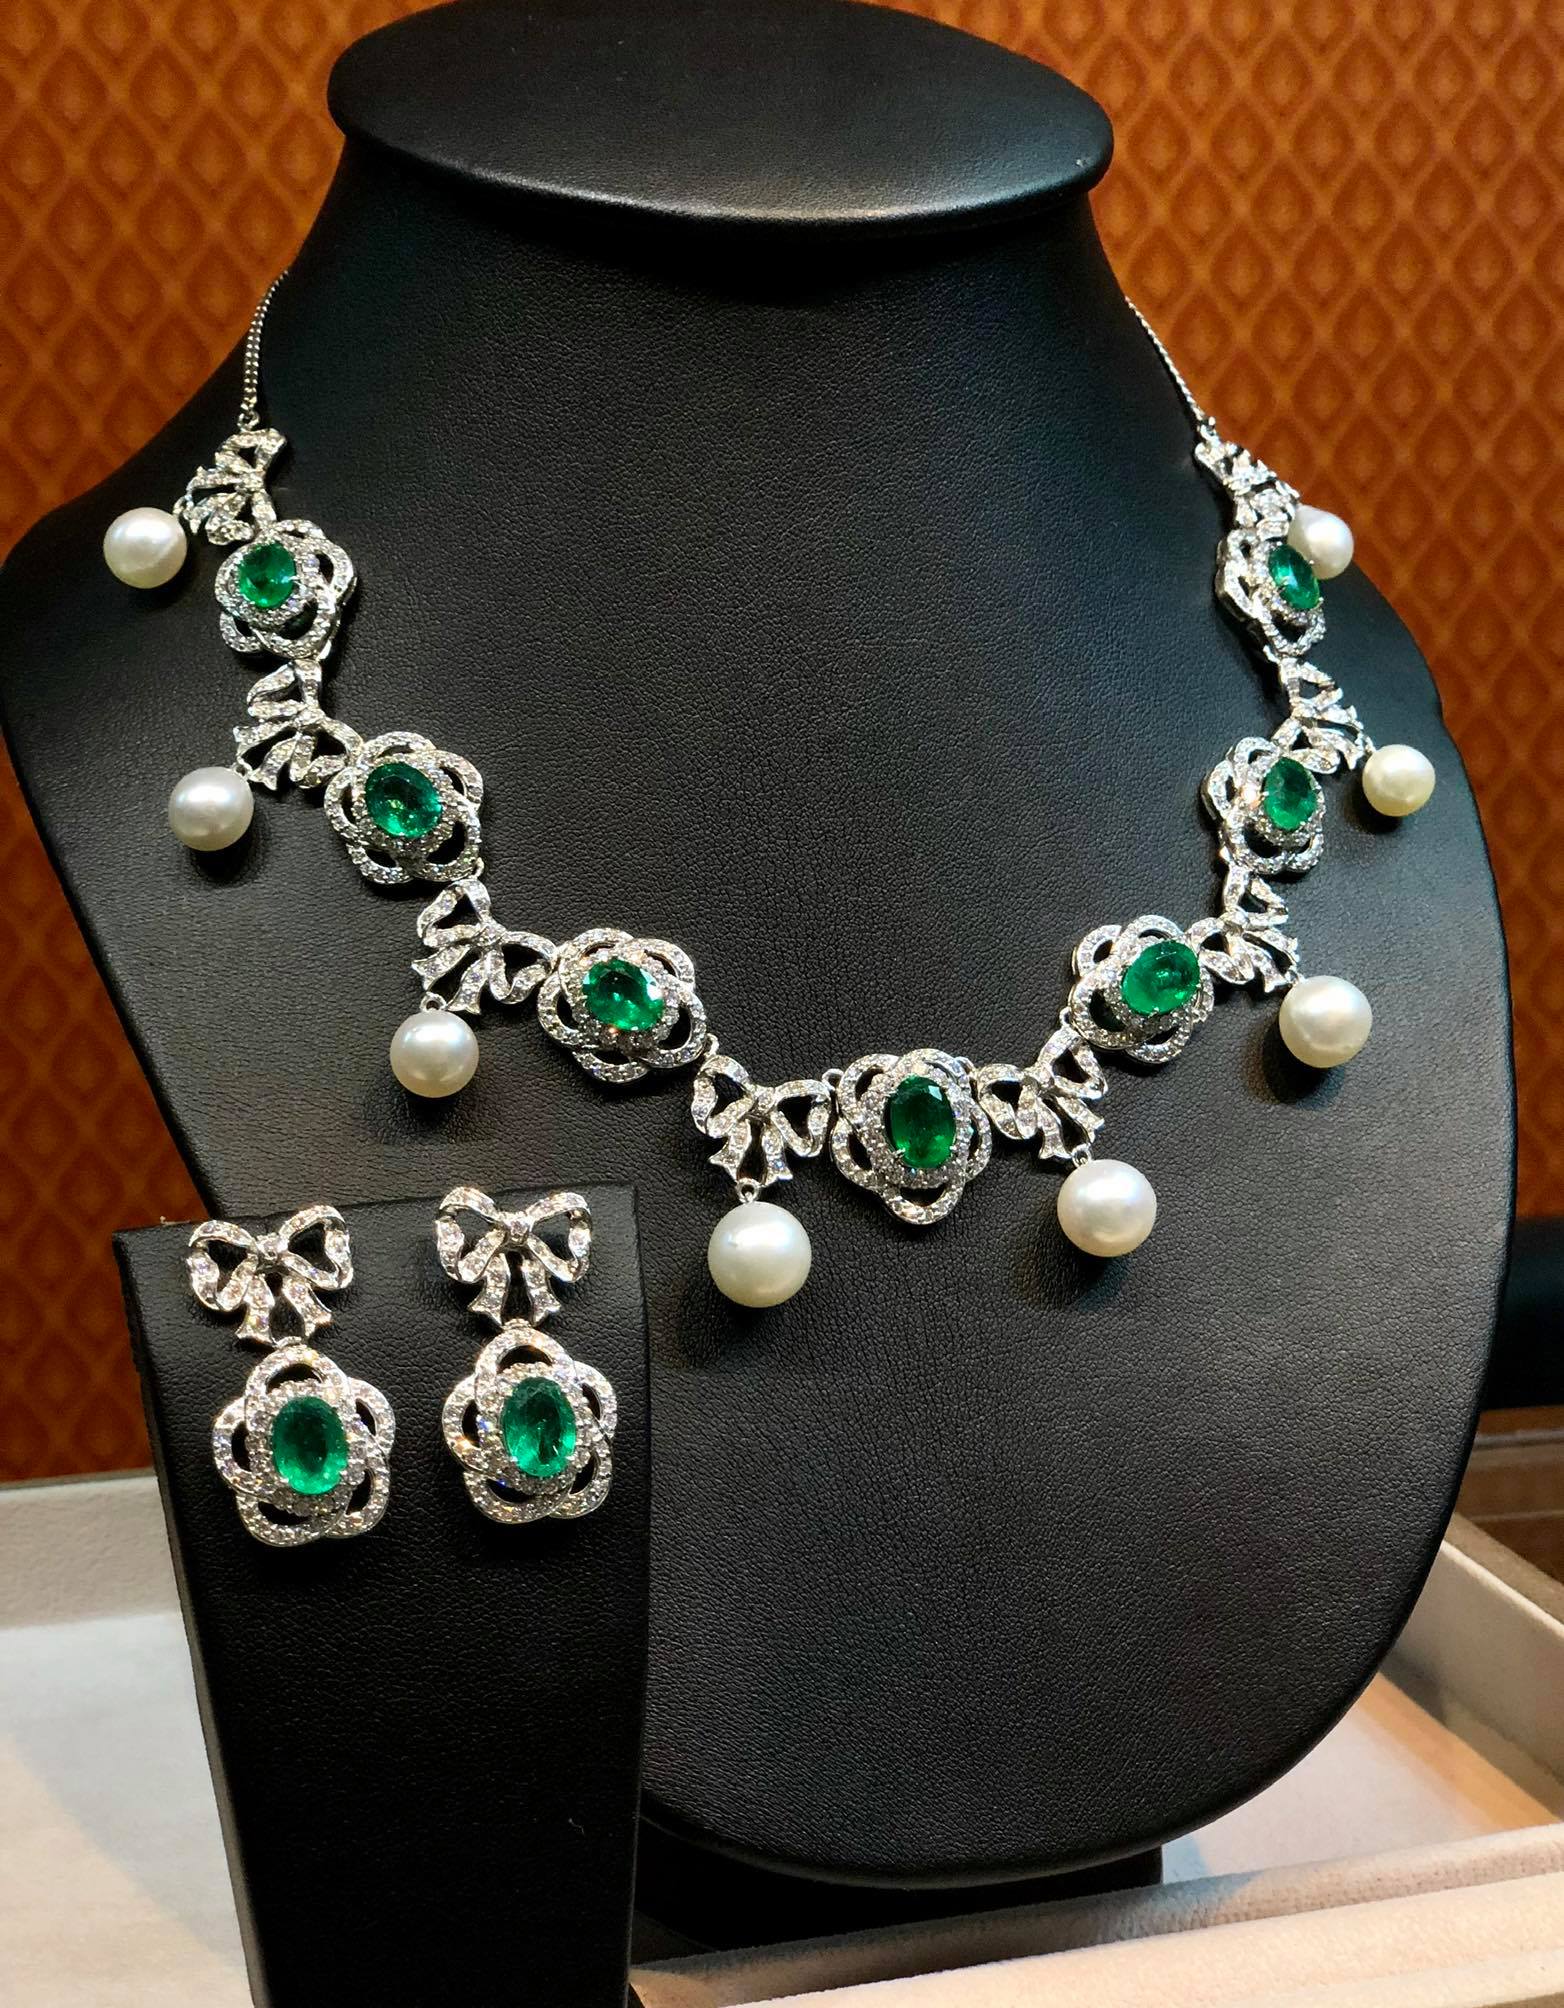 Cute & Lovely! With South Sea Pearls and Genuine Emeralds and Diamonds in bow-design necklace!